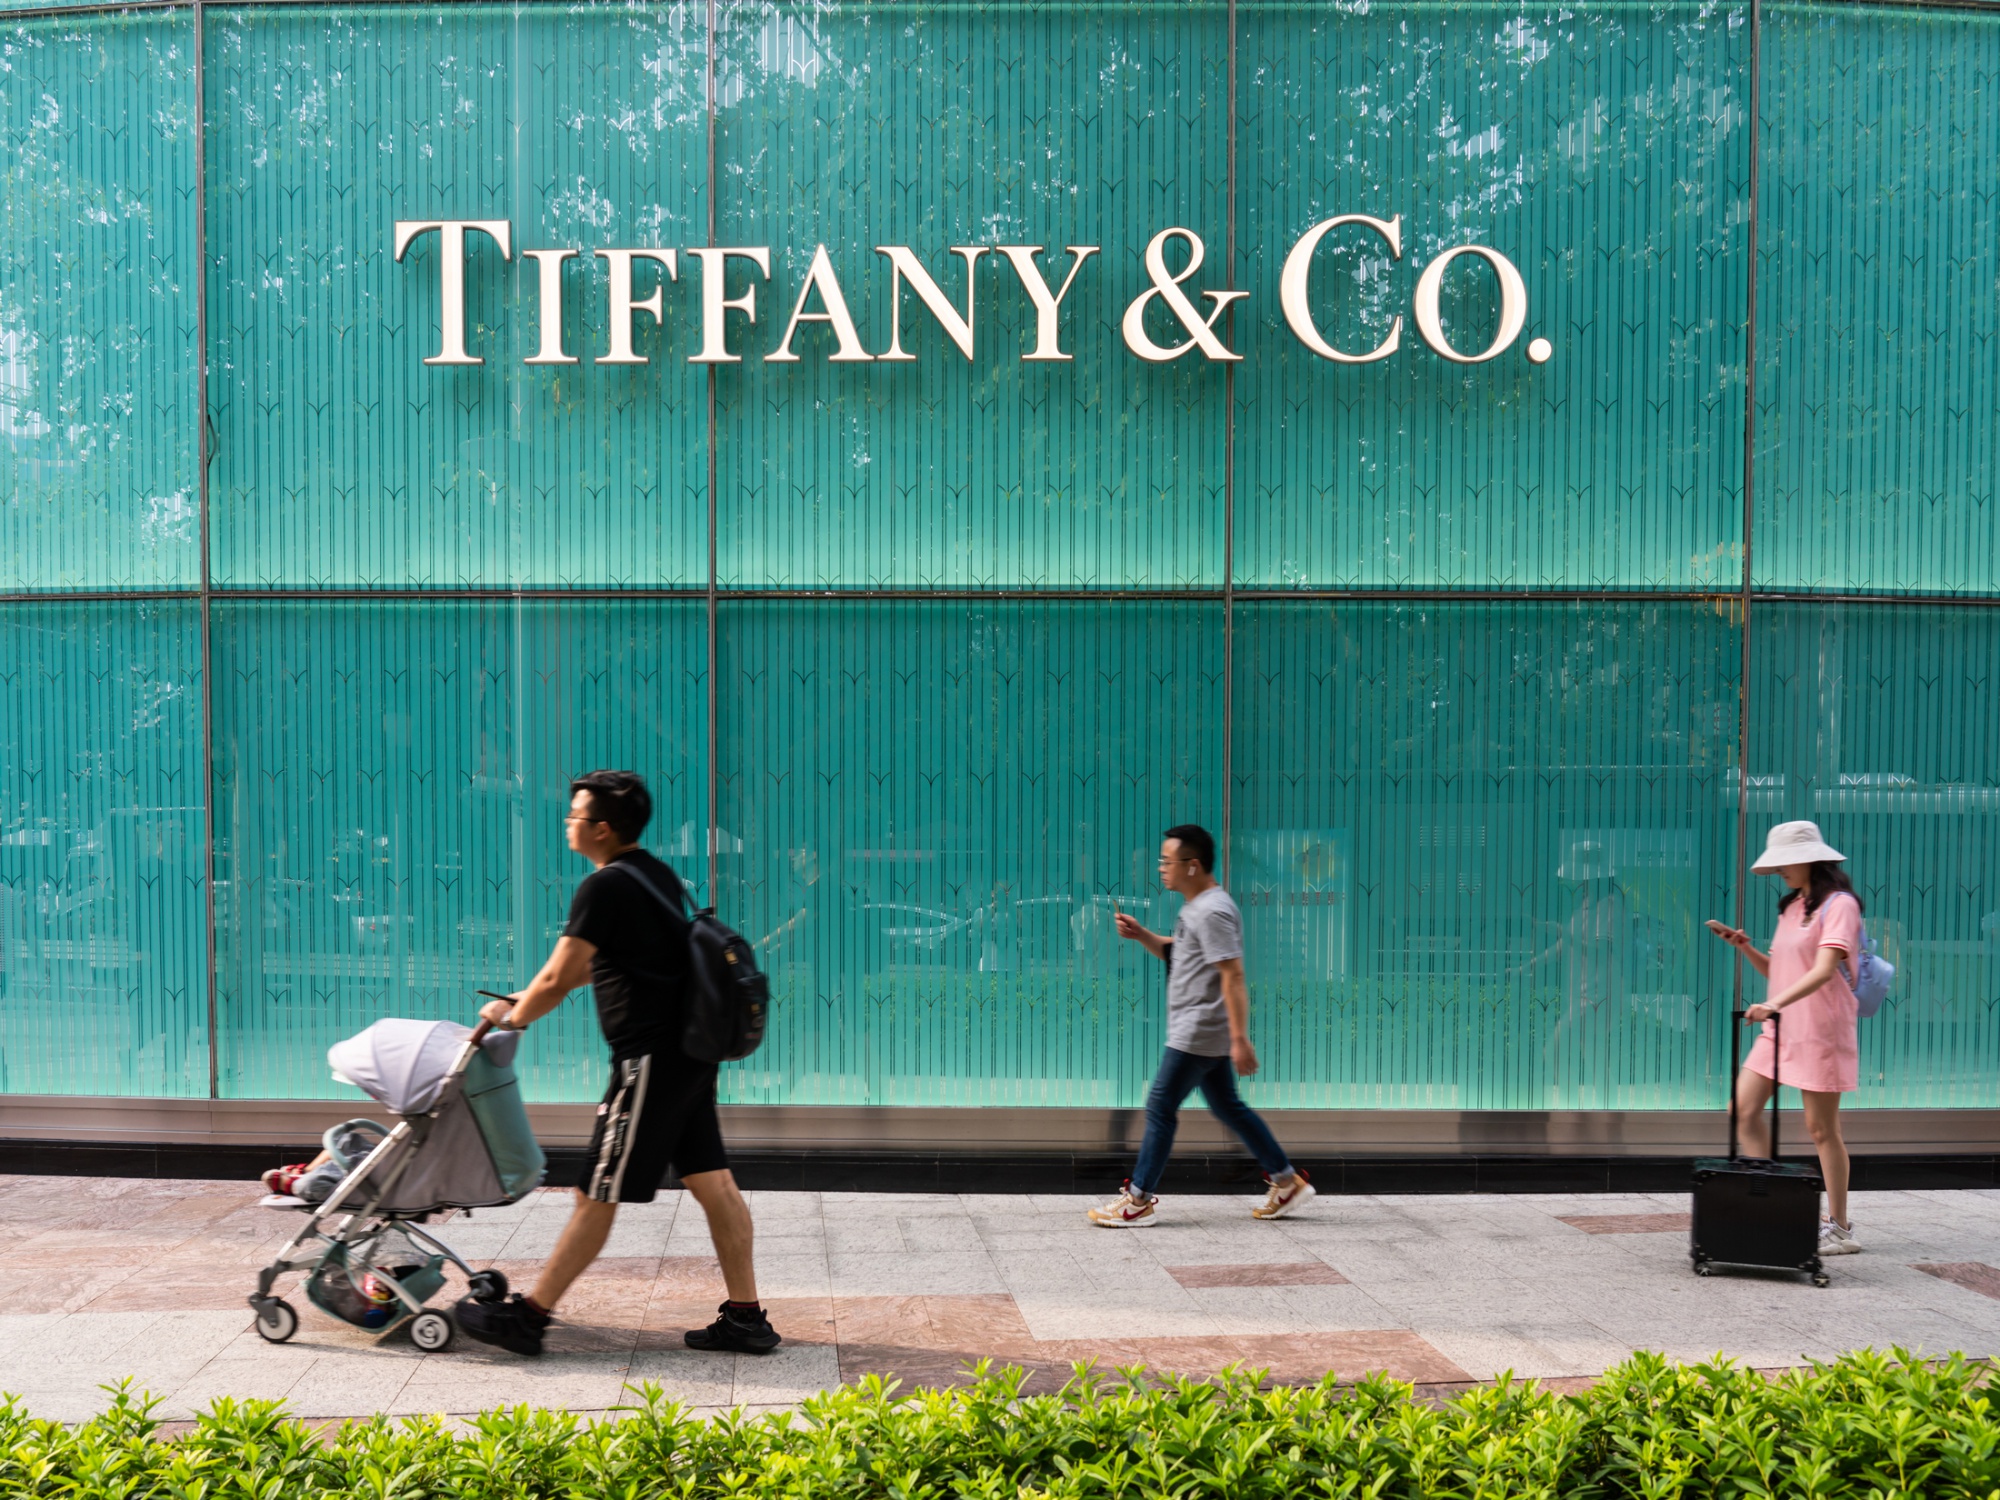 How LVMH's whirlwind courtship sealed $16 billion Tiffany deal